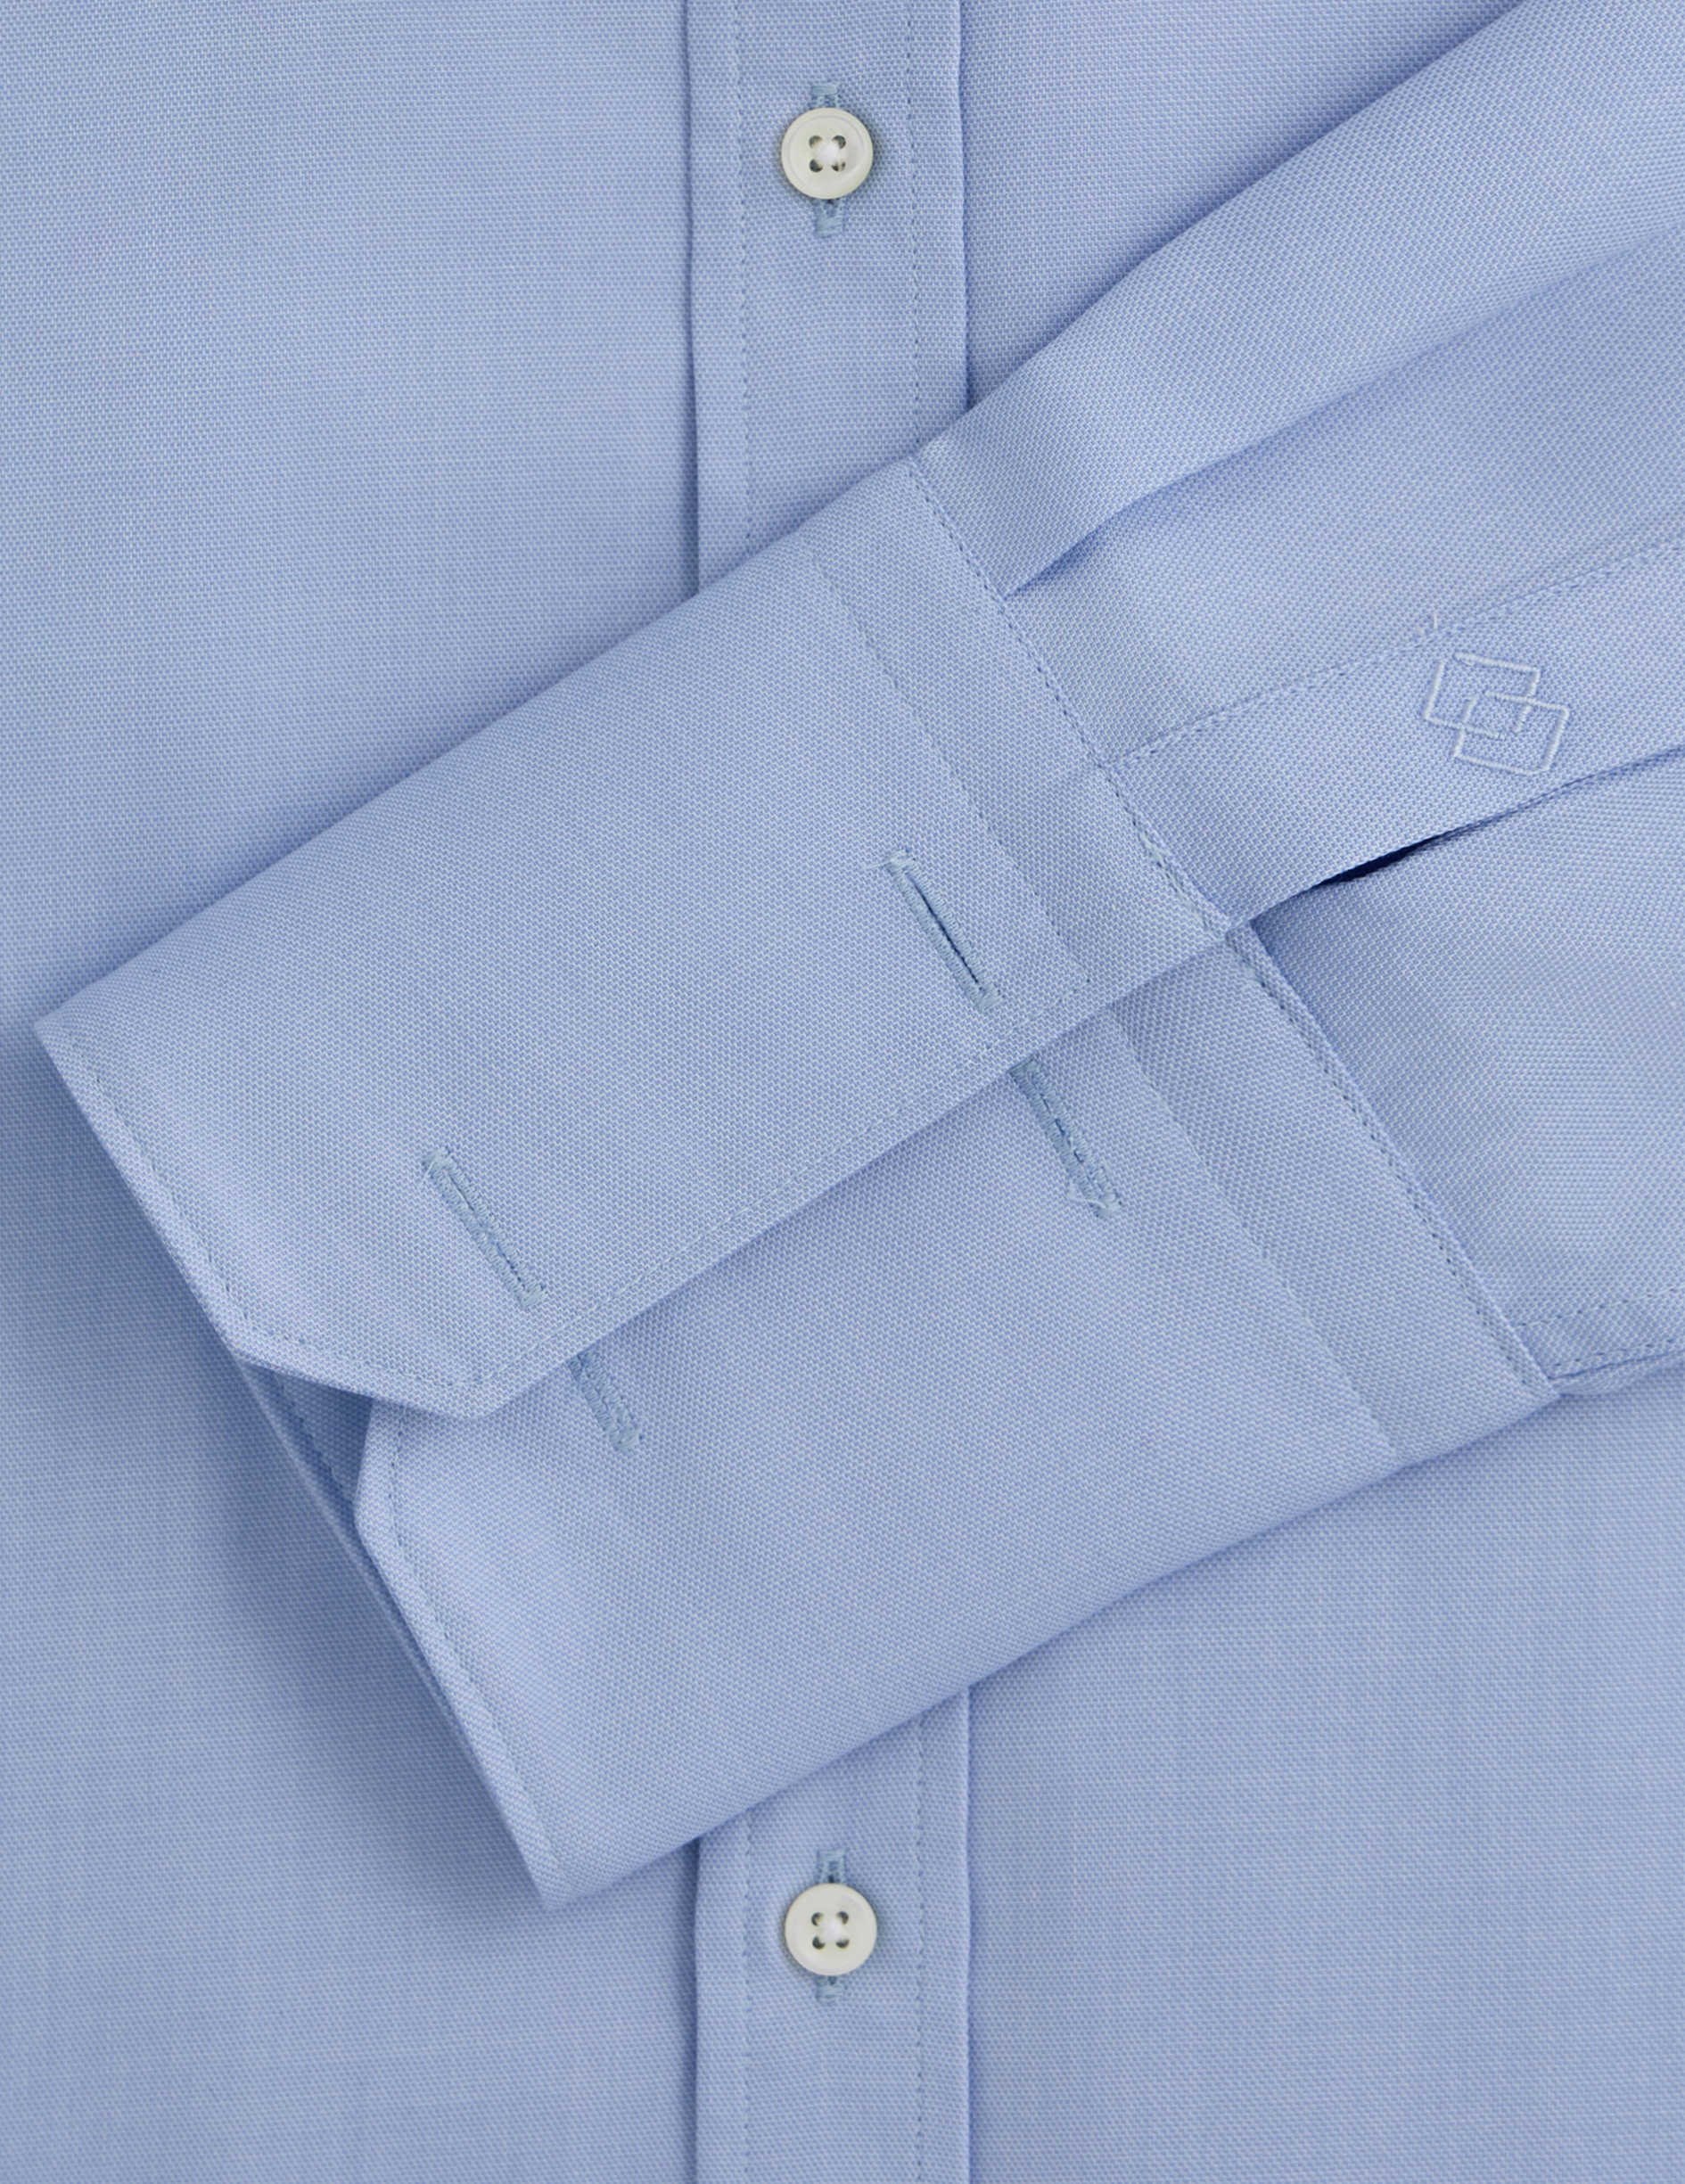 Classic blue shirt - Shaped - Figaret Collar - French Cuffs